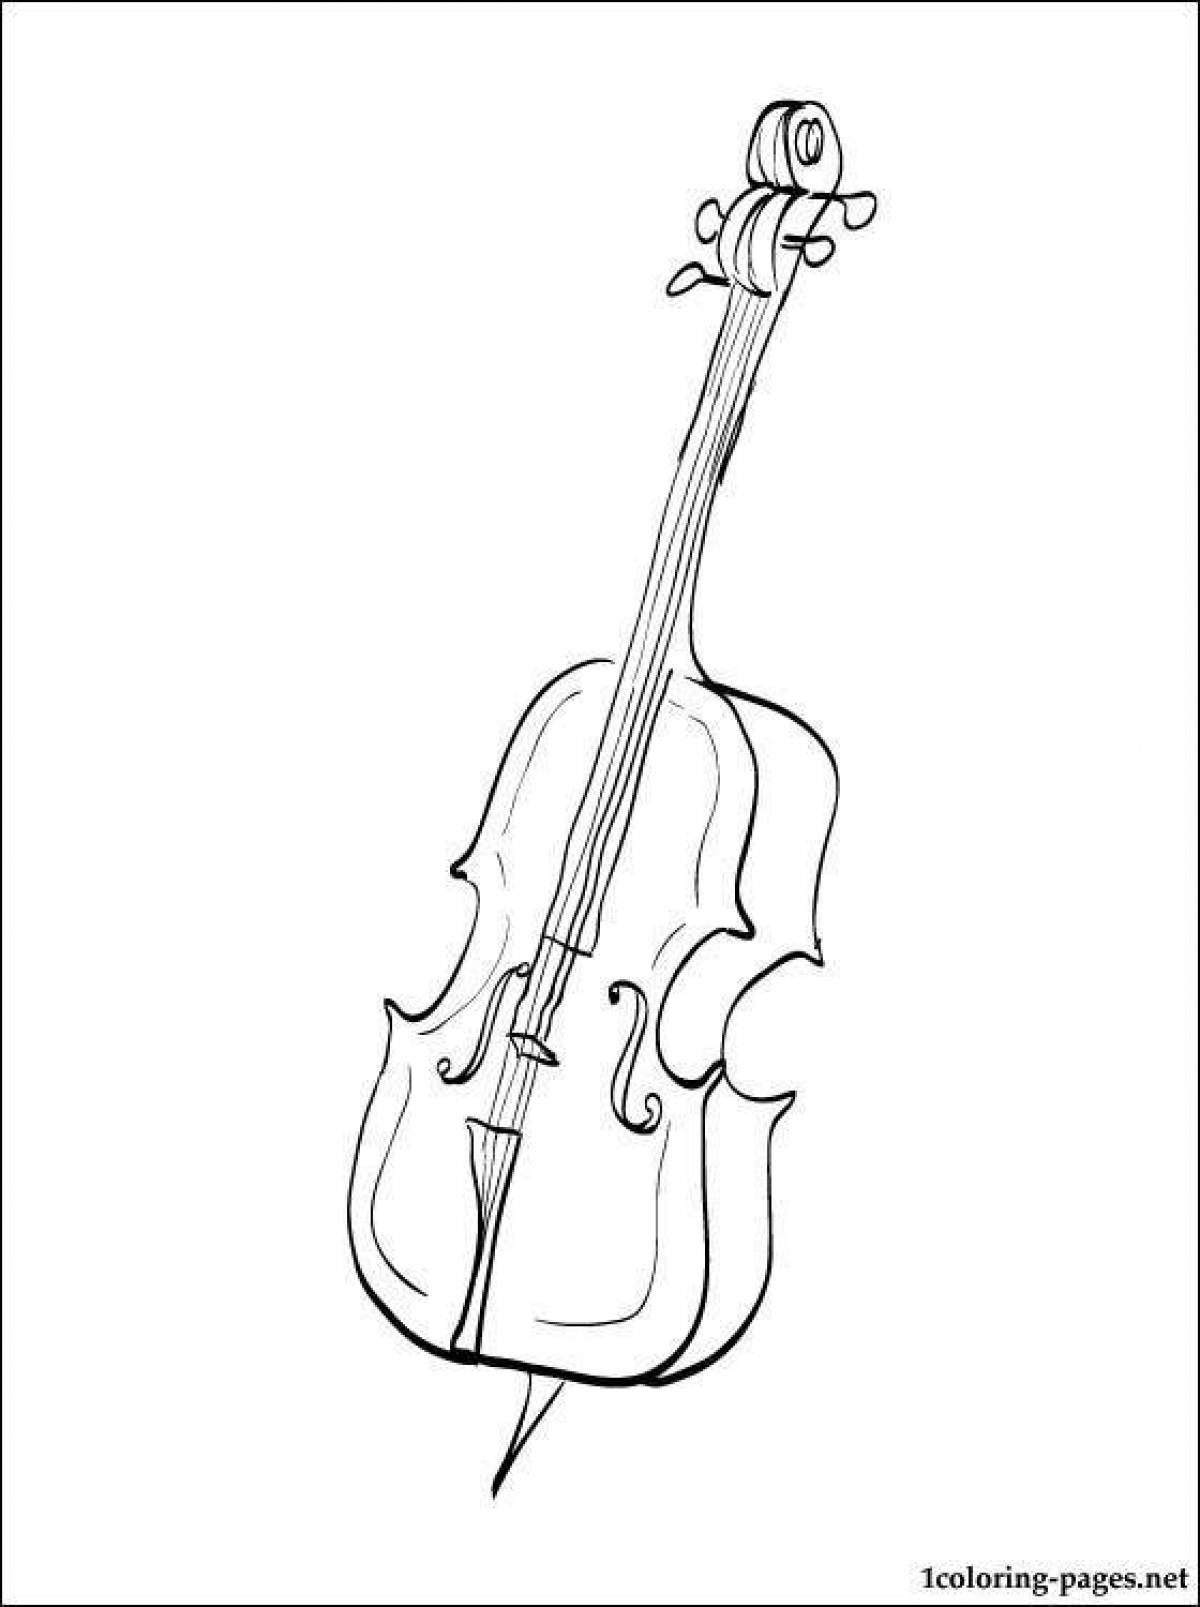 Great cello coloring page